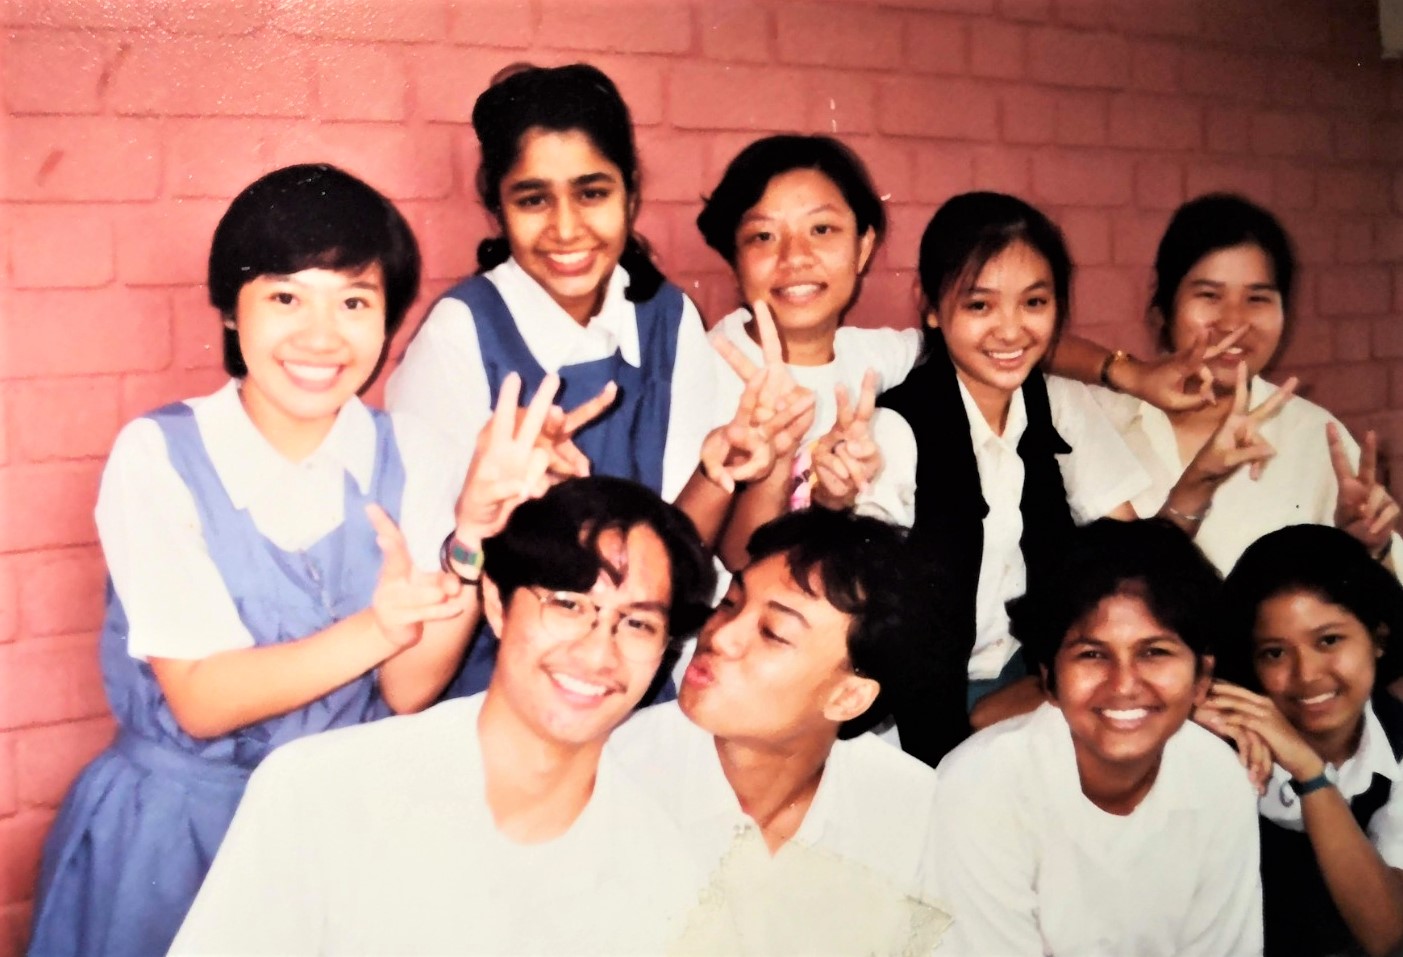 Chan (bottom left) struggled with depression throughout his teens, often not going to school.